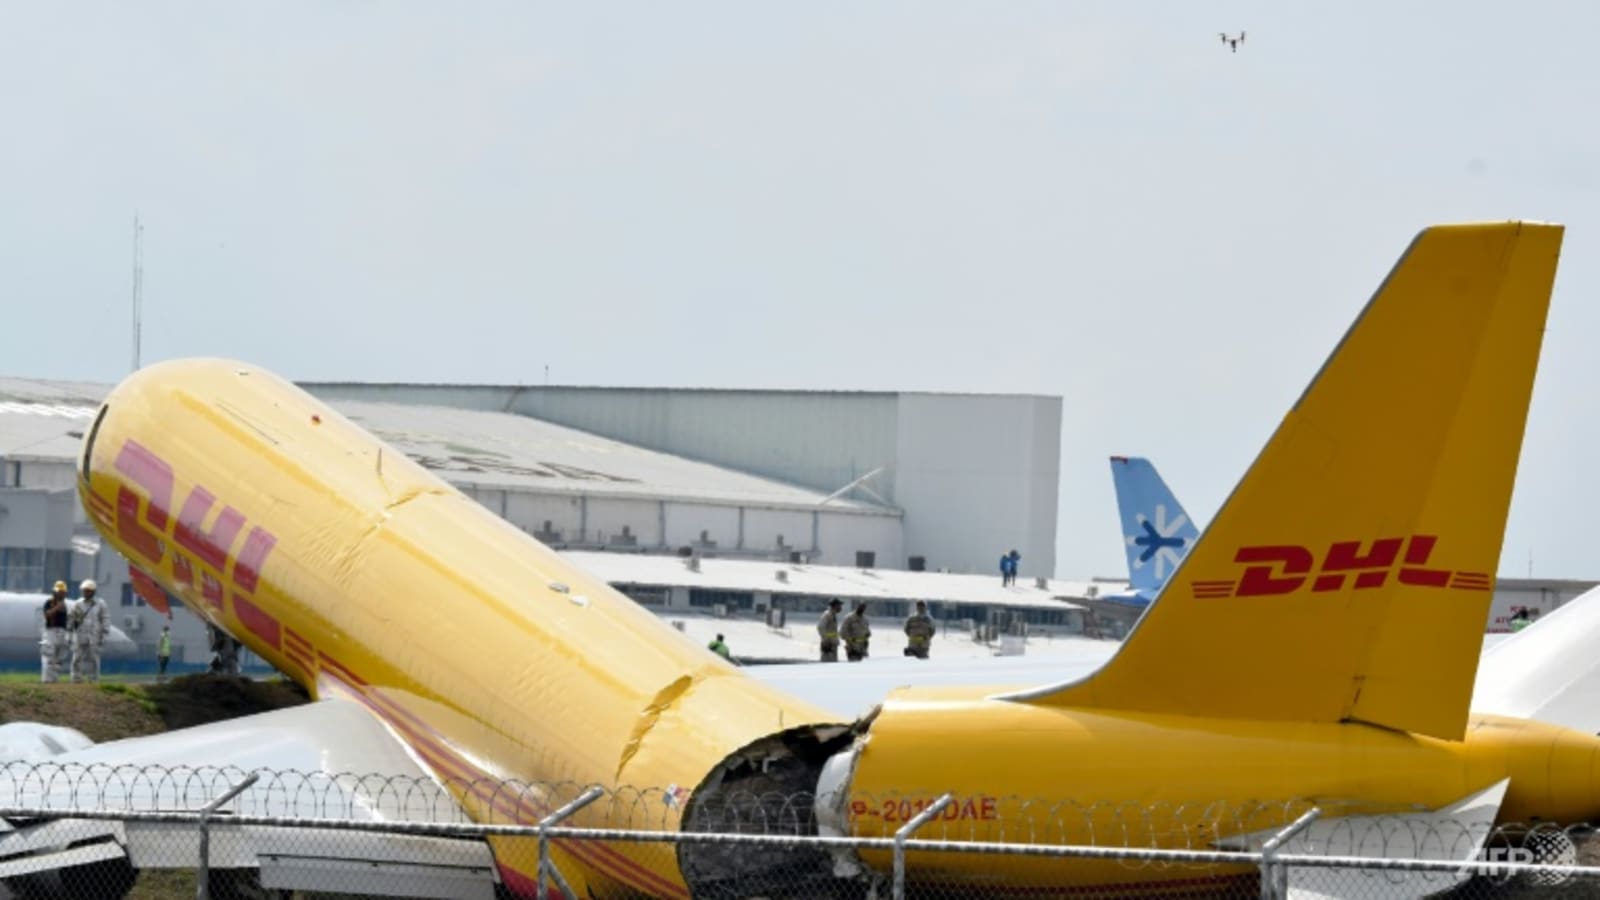 dhl-plane-breaks-in-two-during-emergency-landing-in-costa-rica-airport